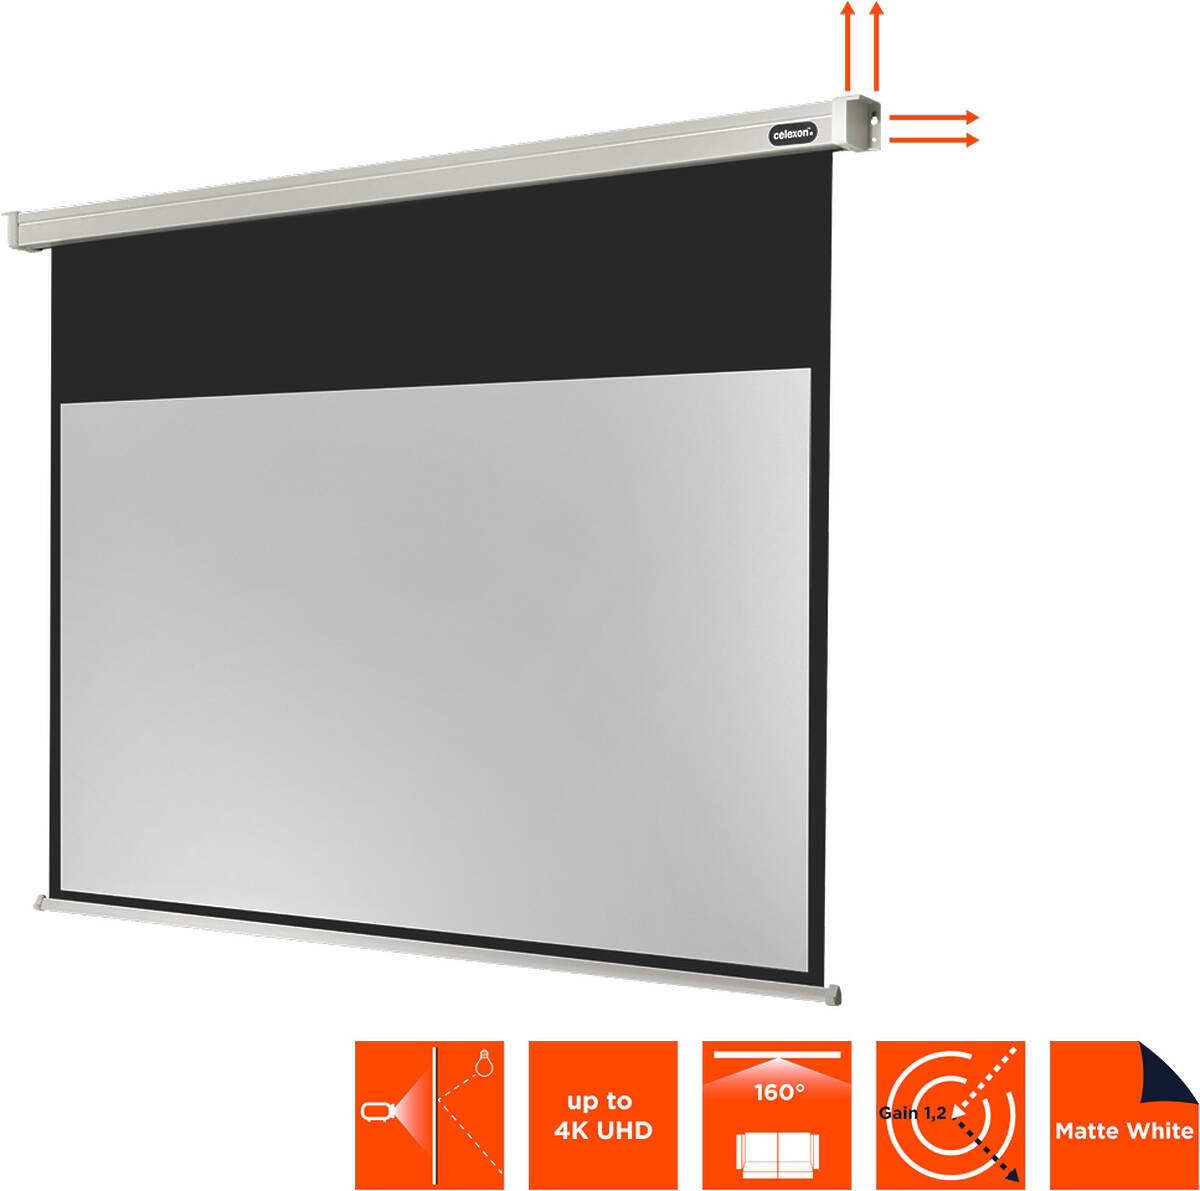 Celexon EP/194X109 88" (2.23m)
 16:9 aspect ratio projection screen product image. Click to enlarge.